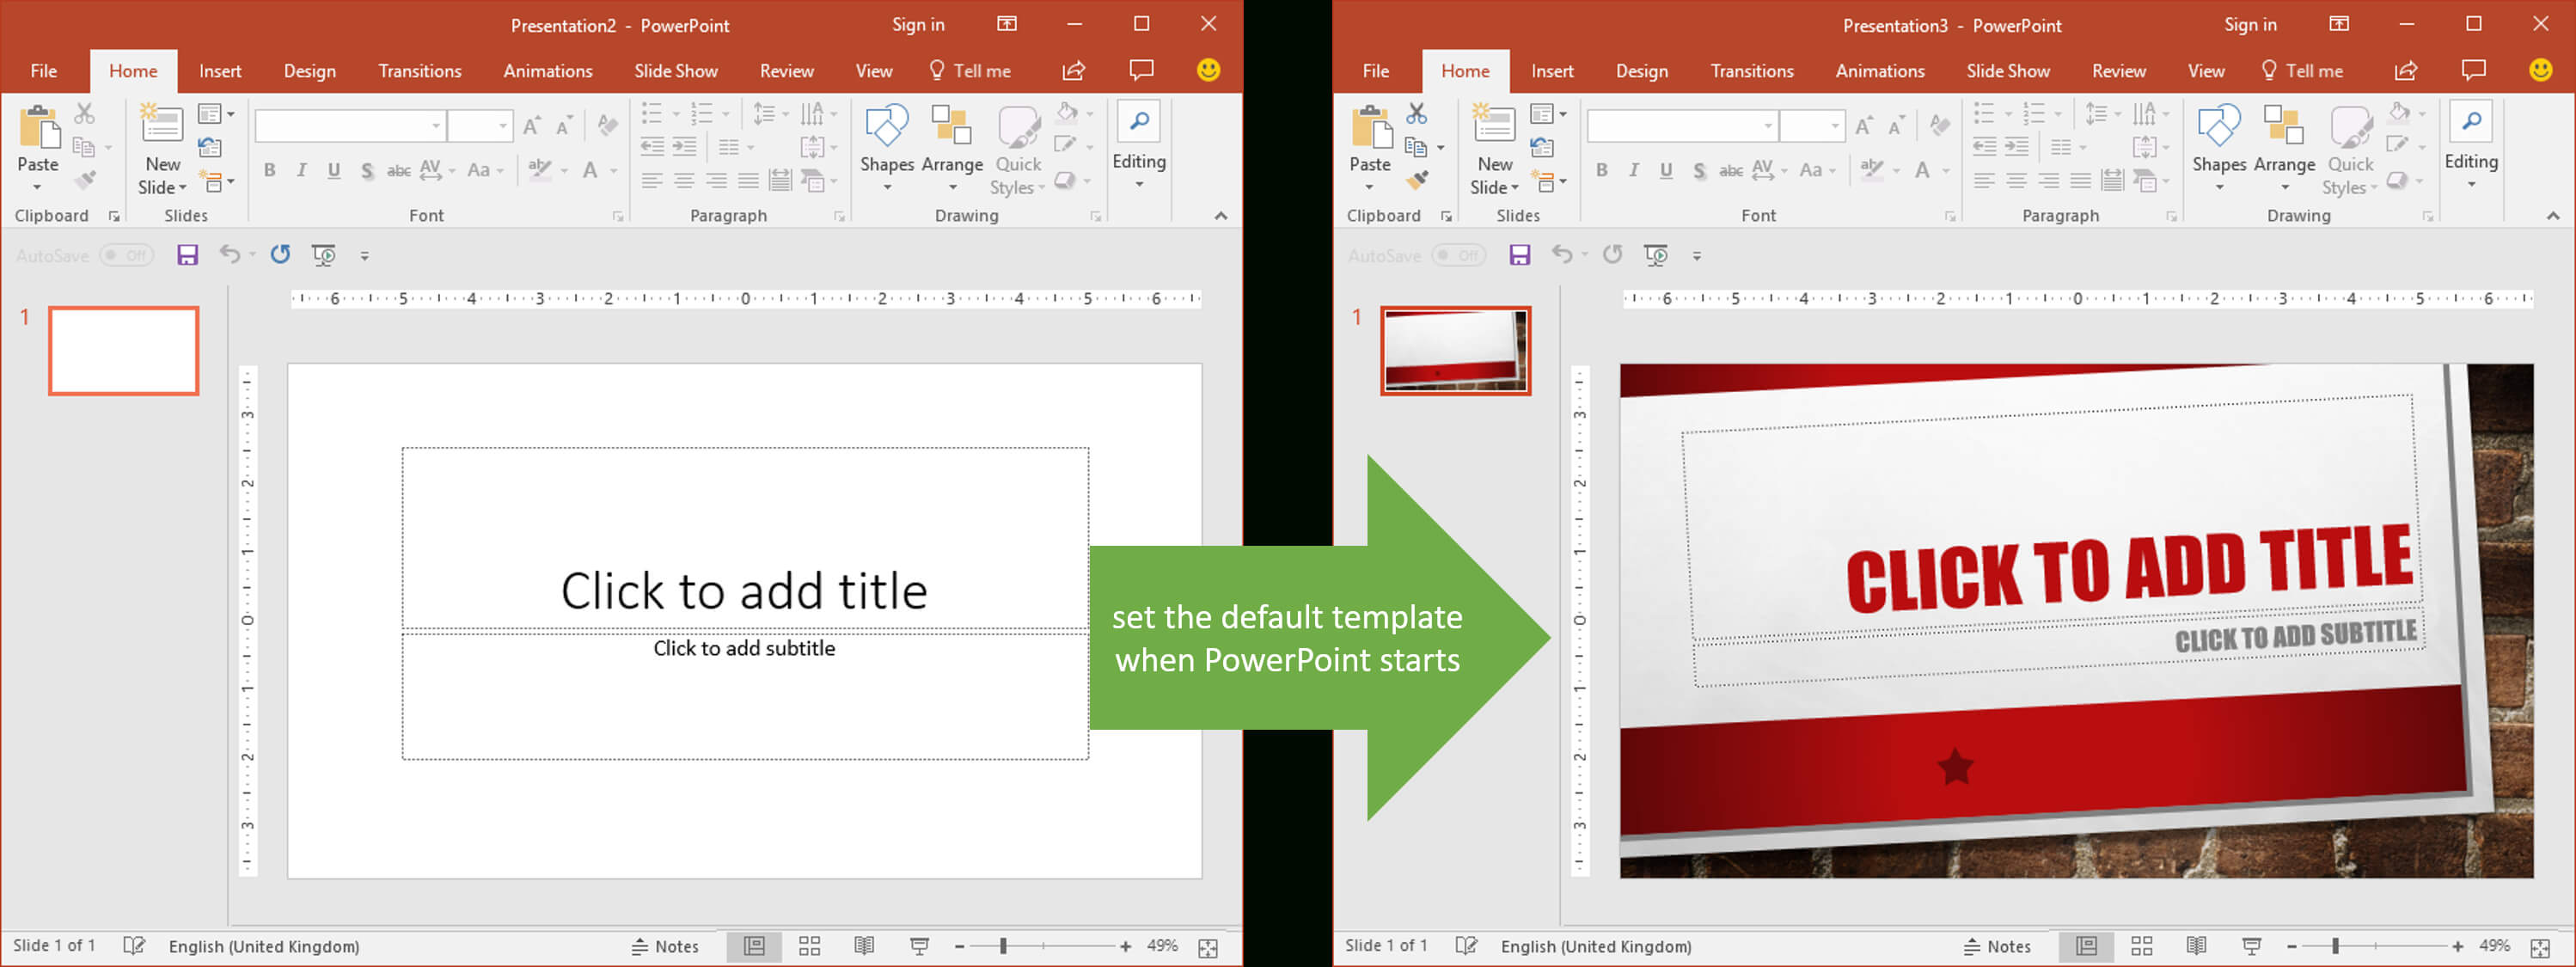 Set The Default Template When Powerpoint Starts | Youpresent Inside Powerpoint 2013 Template Location